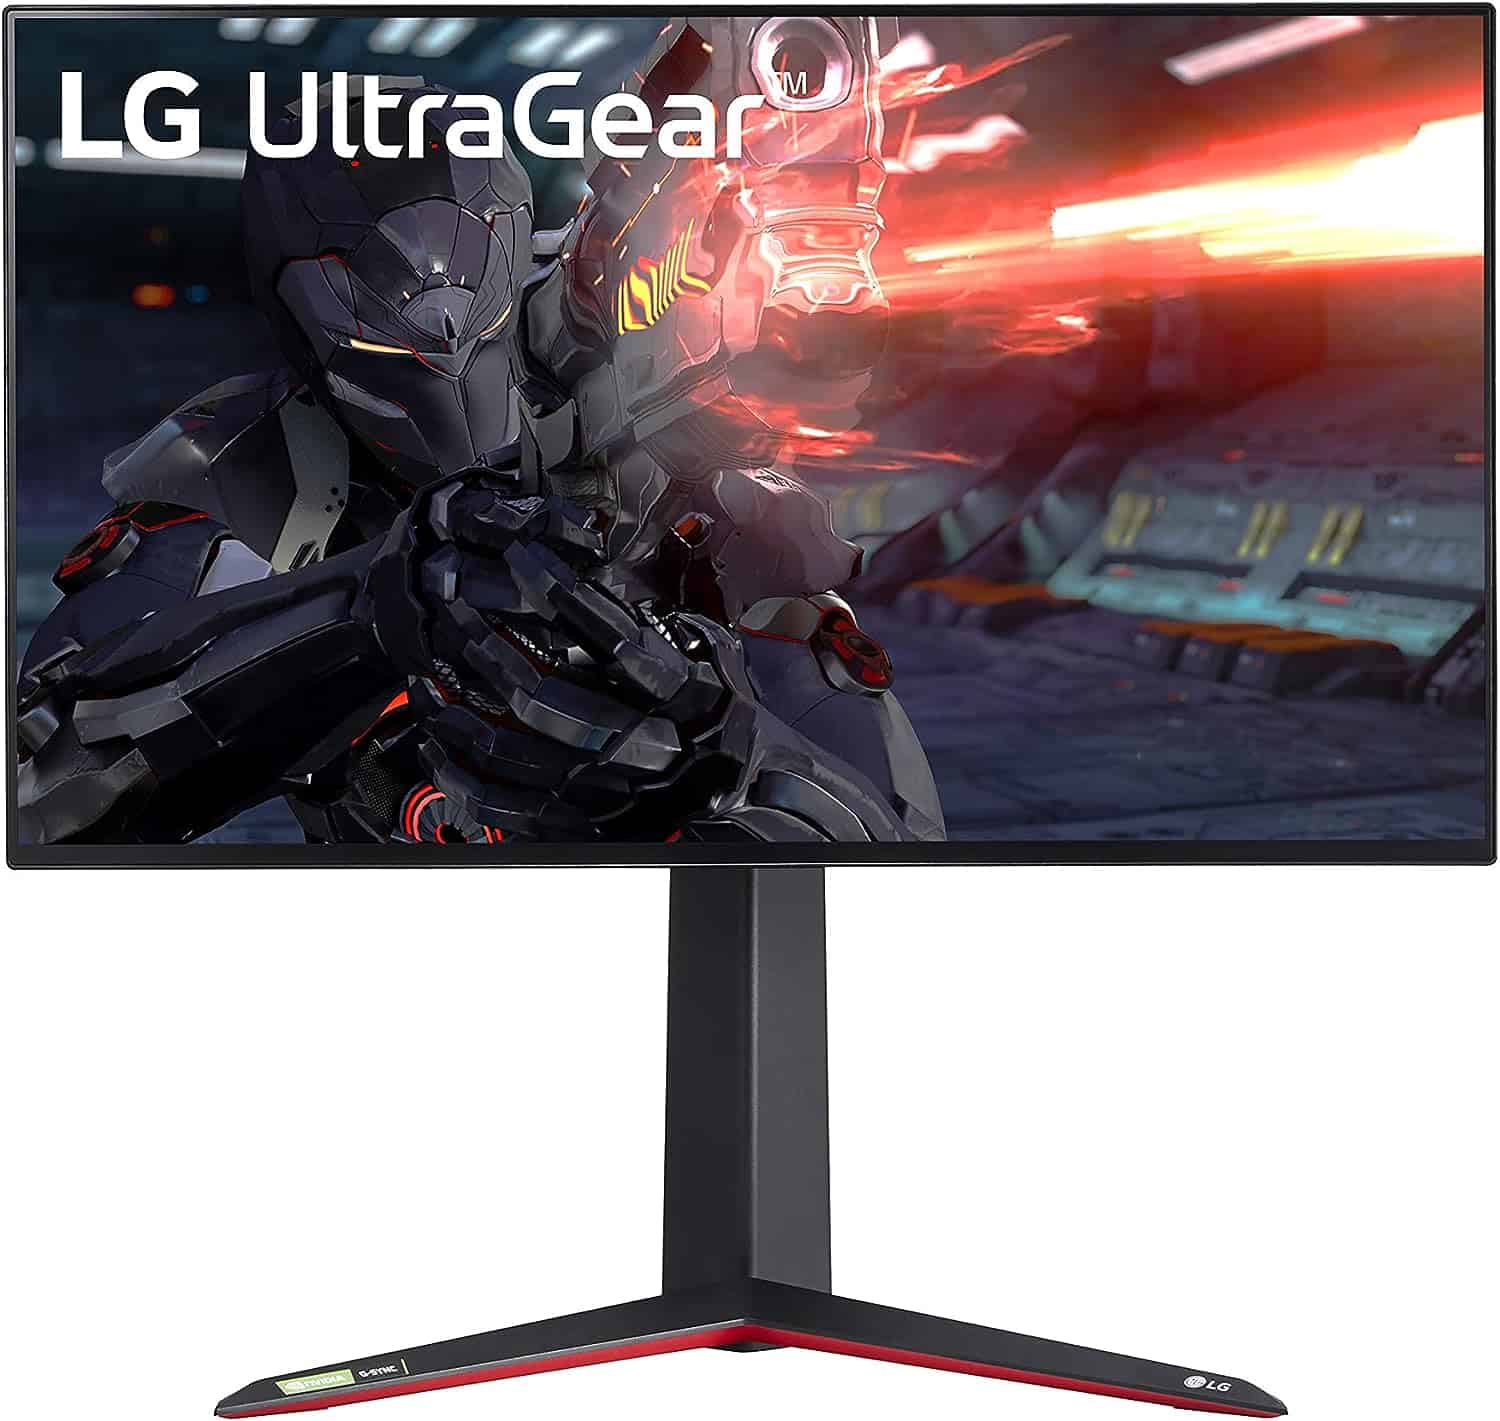 The LG UltraGear monitor, model 27GN950-B, is displayed on a white background.